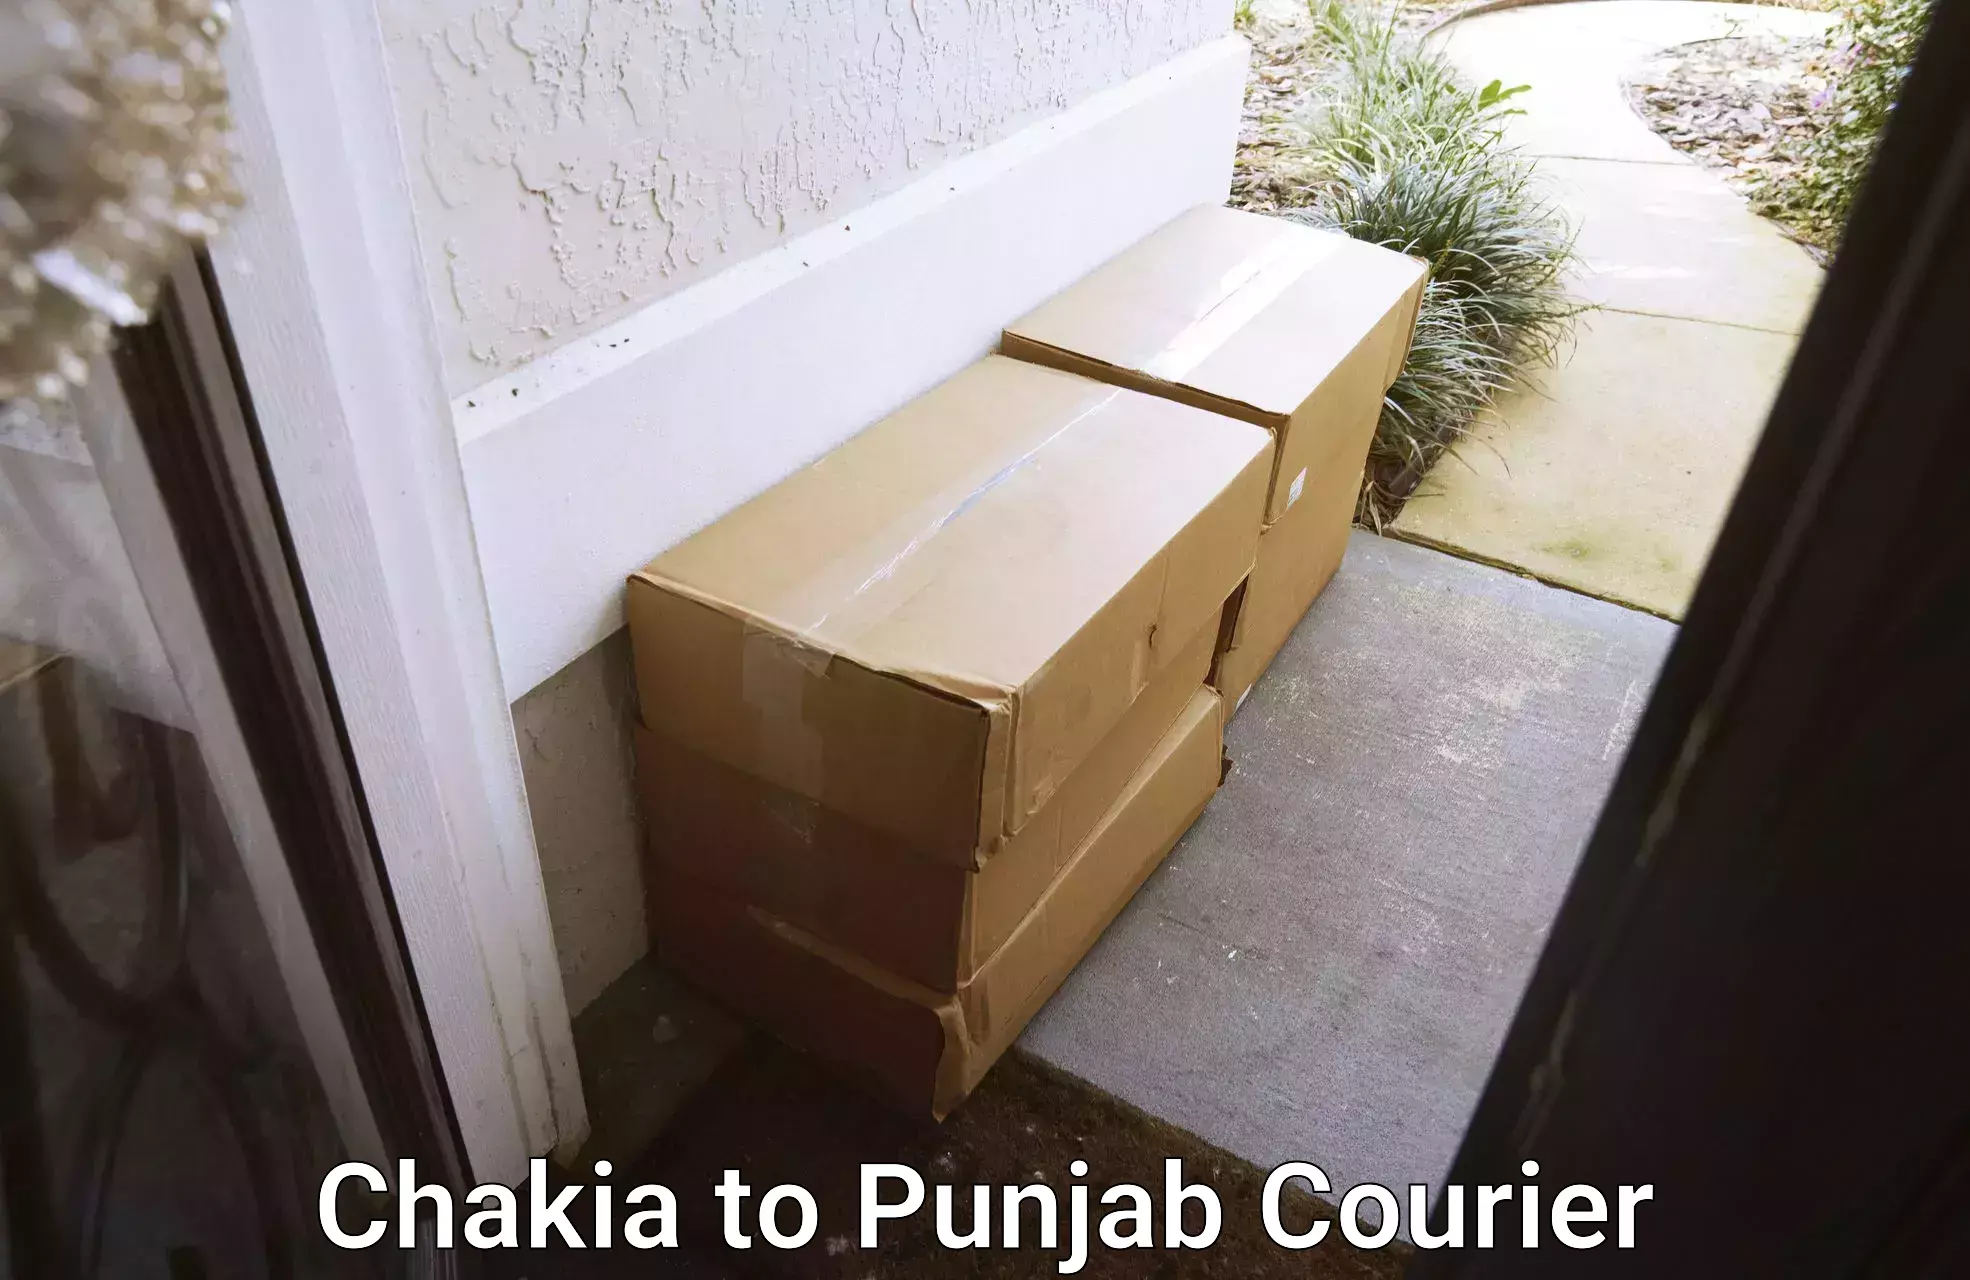 Full-service household moving in Chakia to Jalandhar